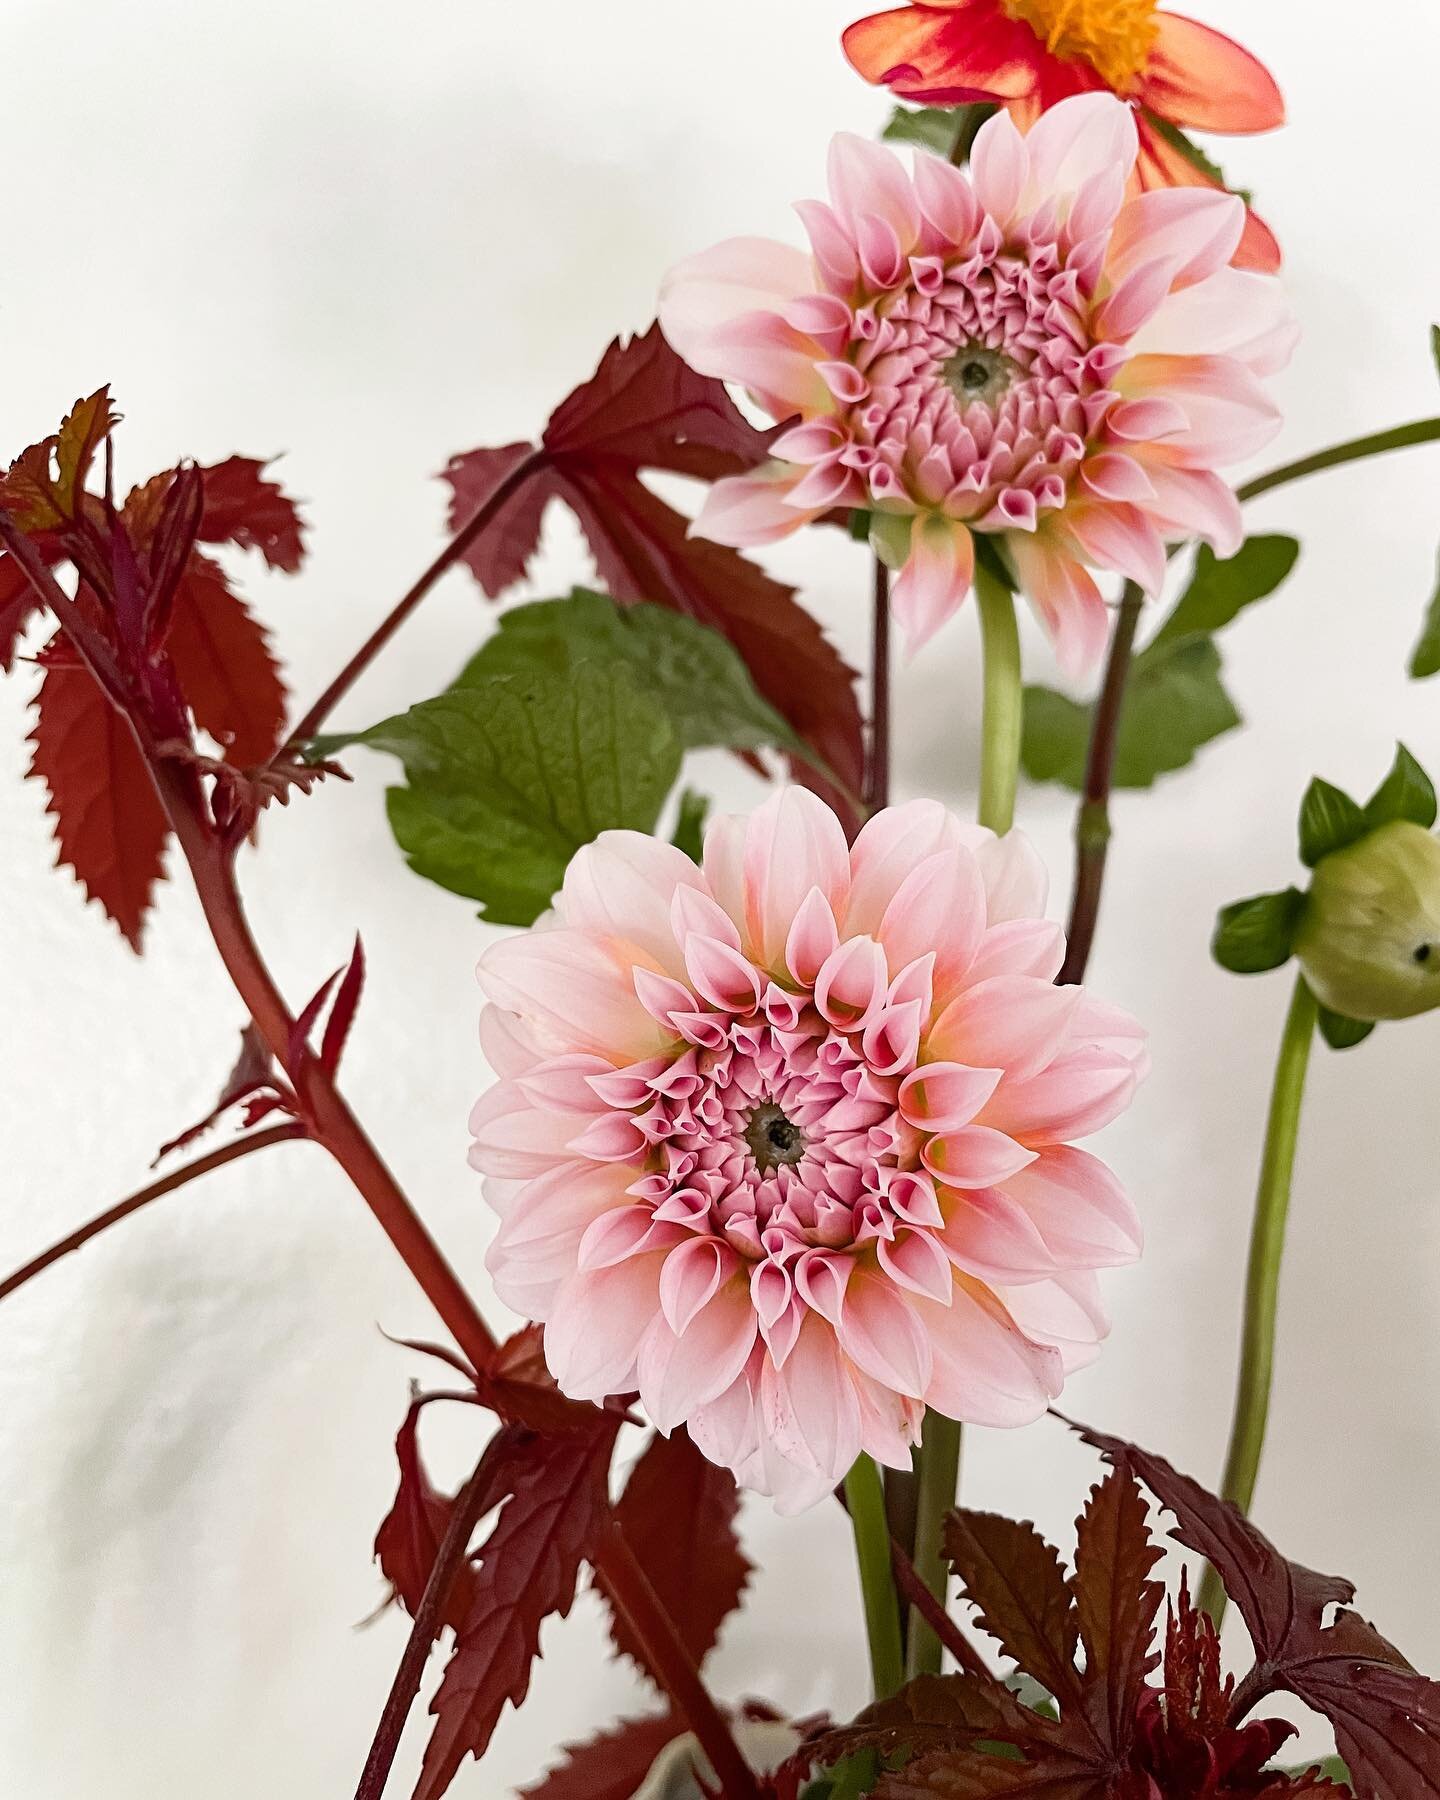 Two facts about dahlias: 1) they don&rsquo;t open up very much after they&rsquo;ve been cut, and 2) they have a relatively short vase life compared to other cut flowers

These two factors combined put local growers at an advantage: it&rsquo;s difficu